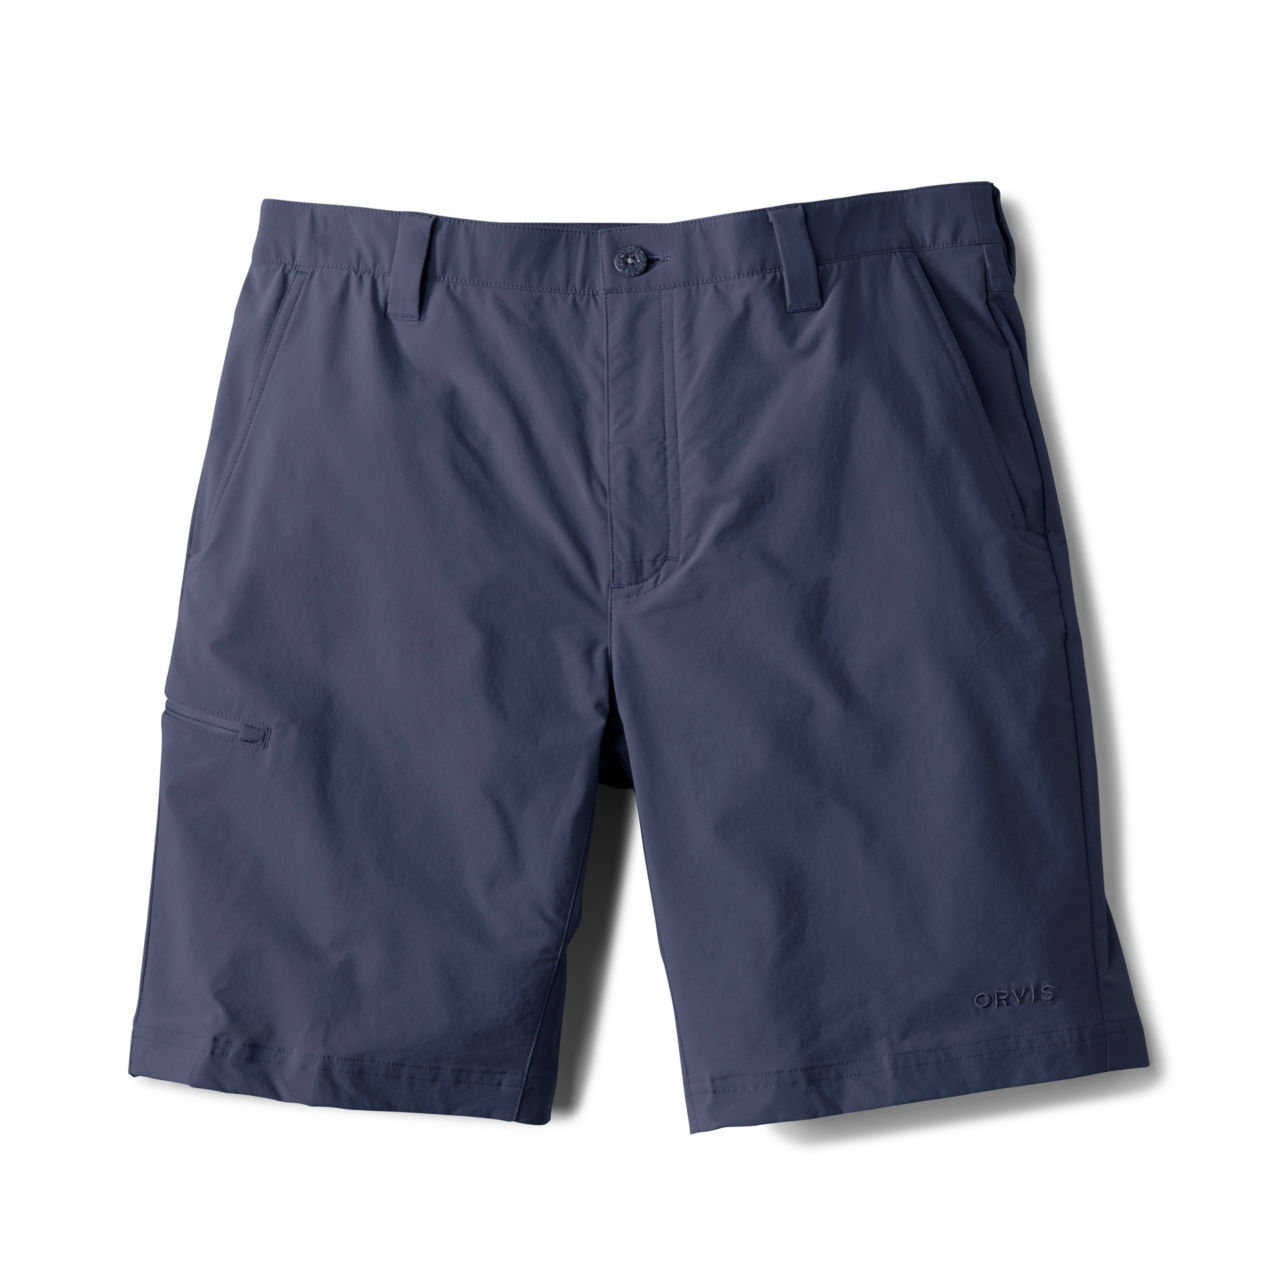 Jackson Quick-Dry Shorts - TRUE NAVY image number 1